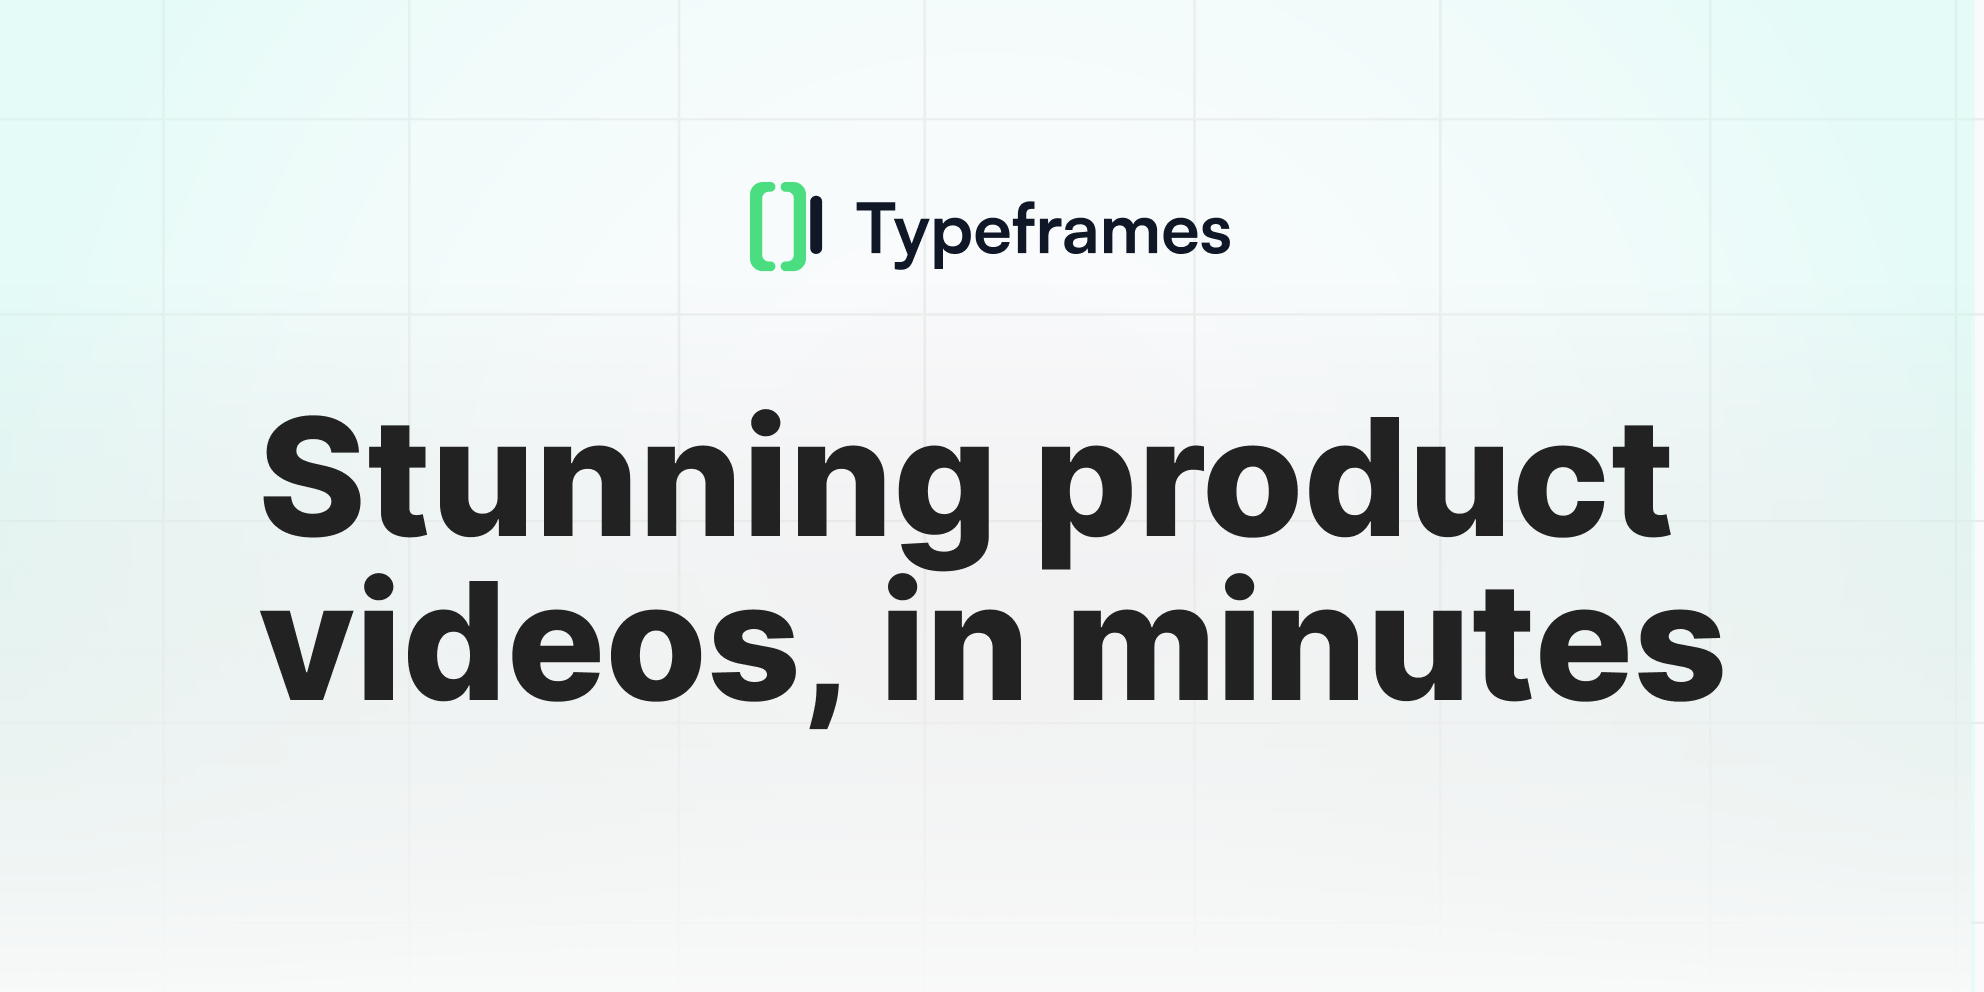 Typeframes - Create Stunning Product Videos with Ease